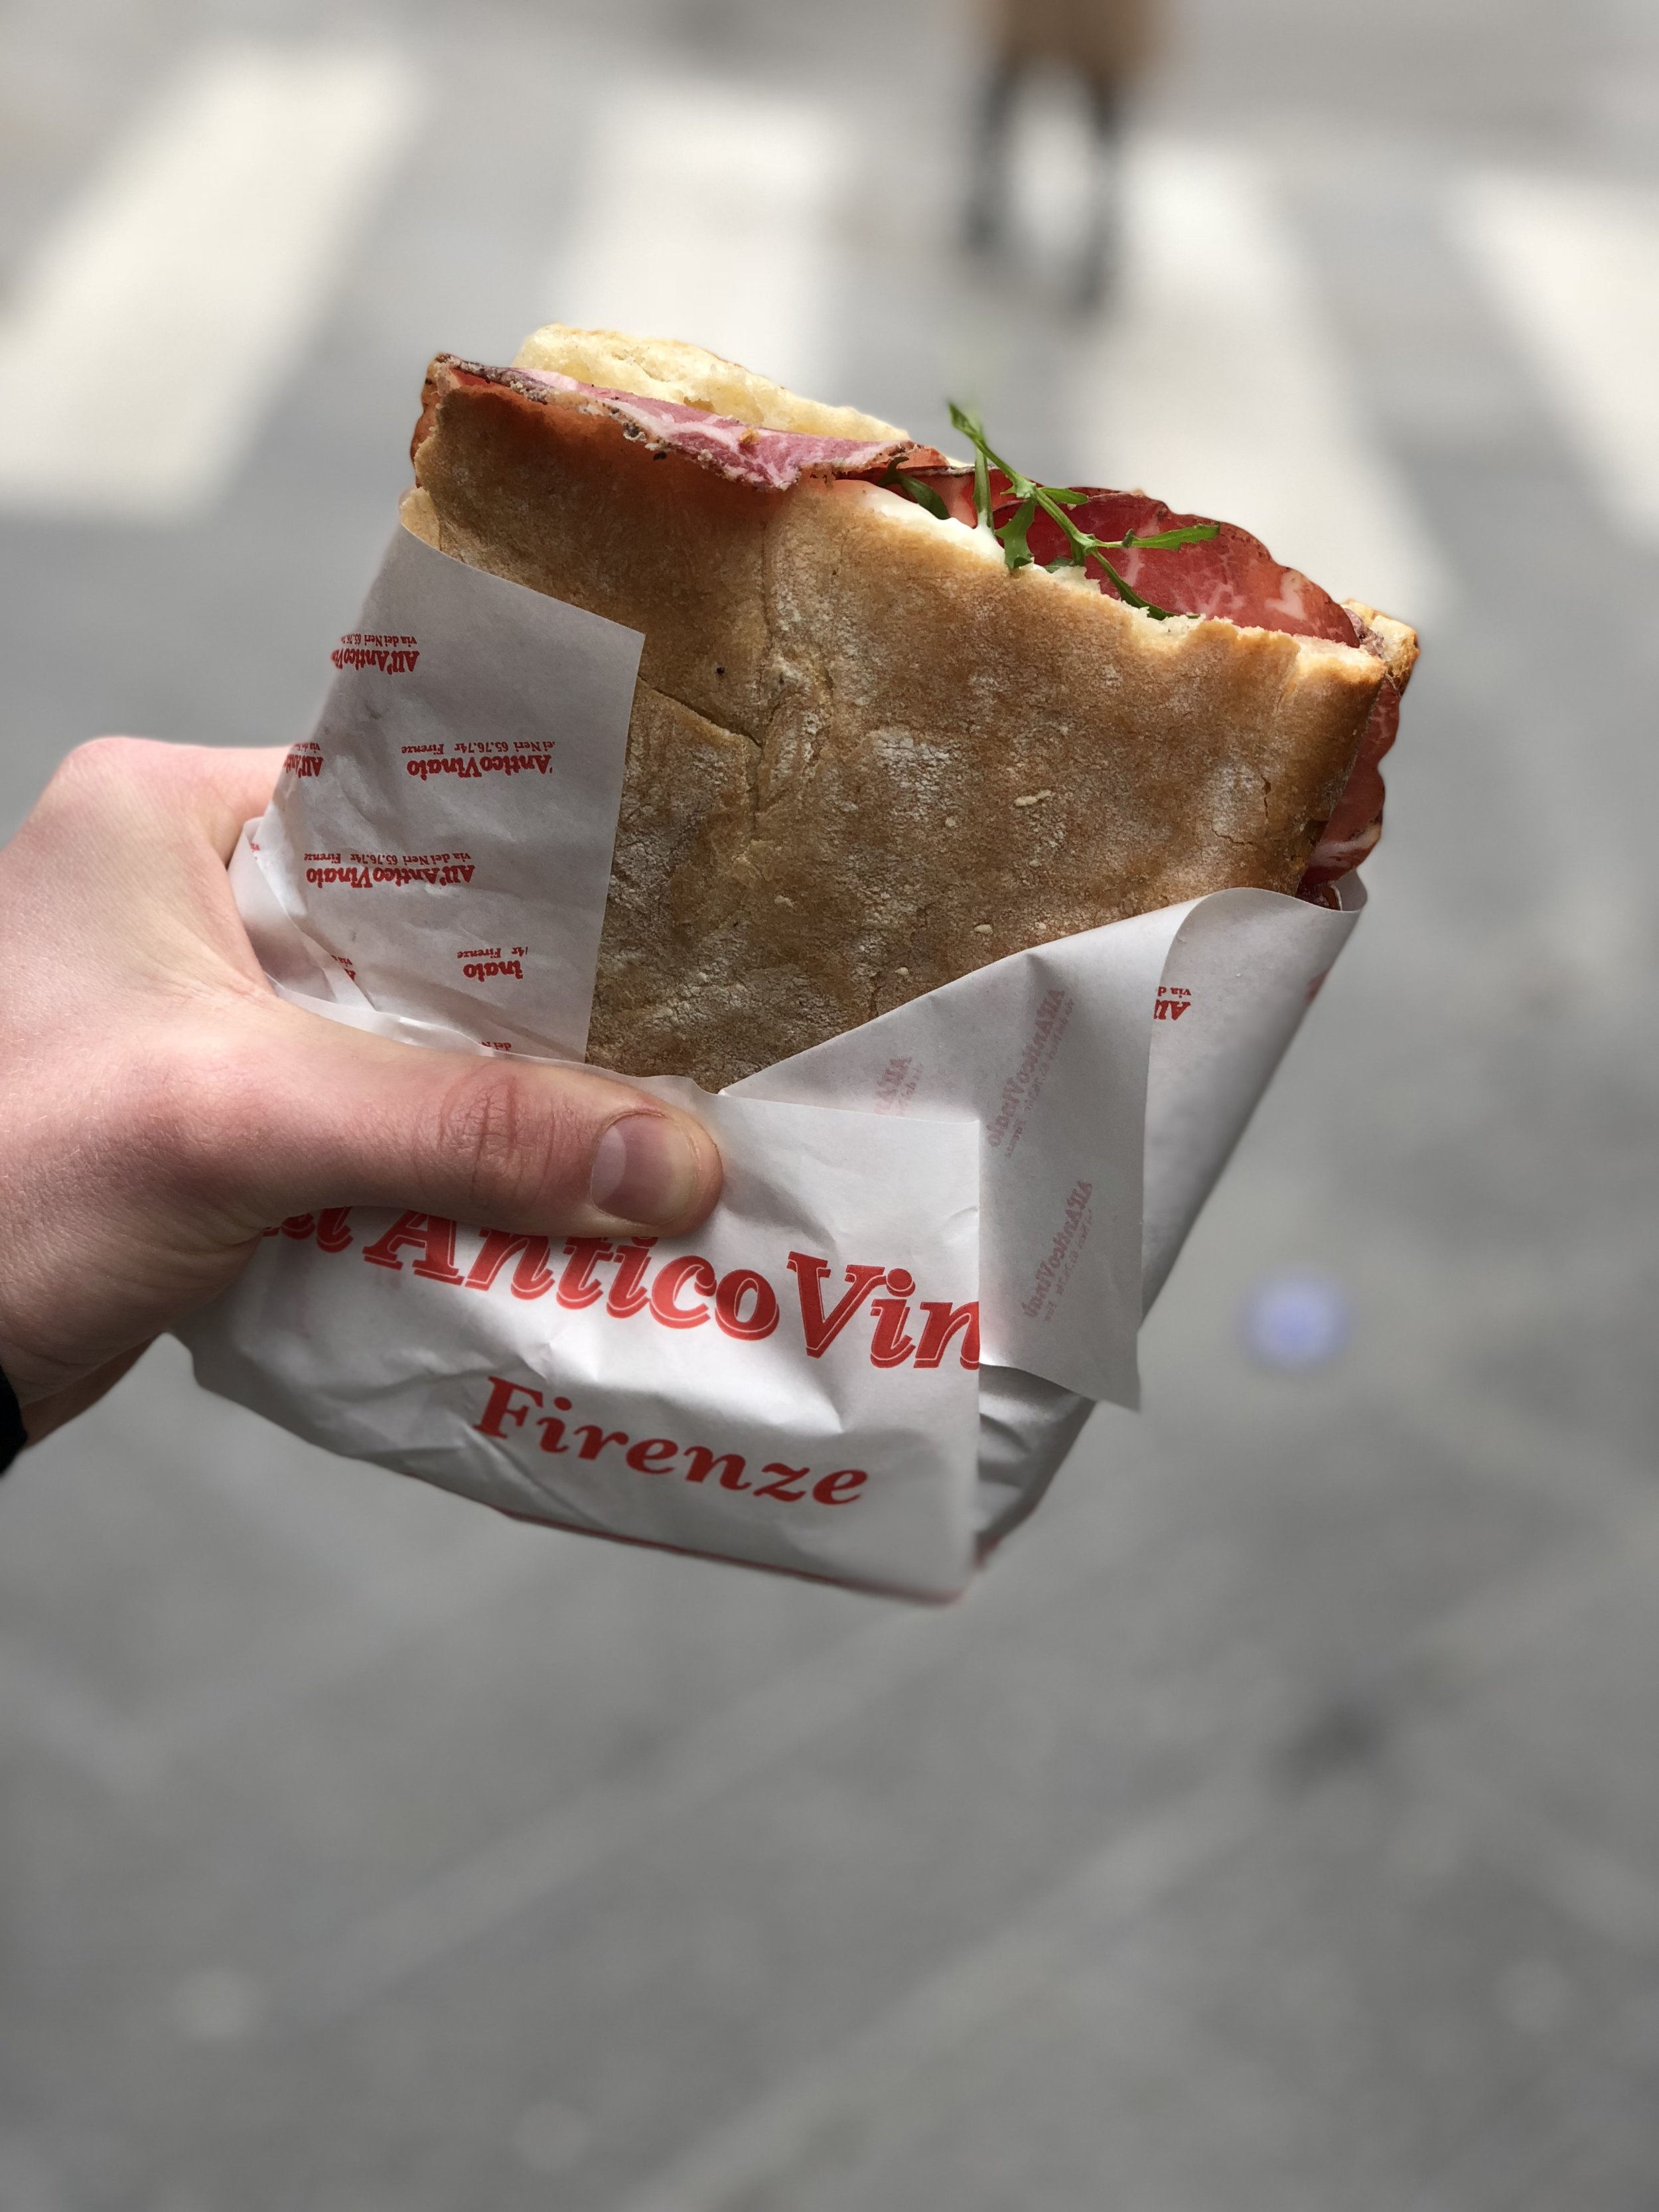 Sandwich from famous sandwich shop in Florence, Italy